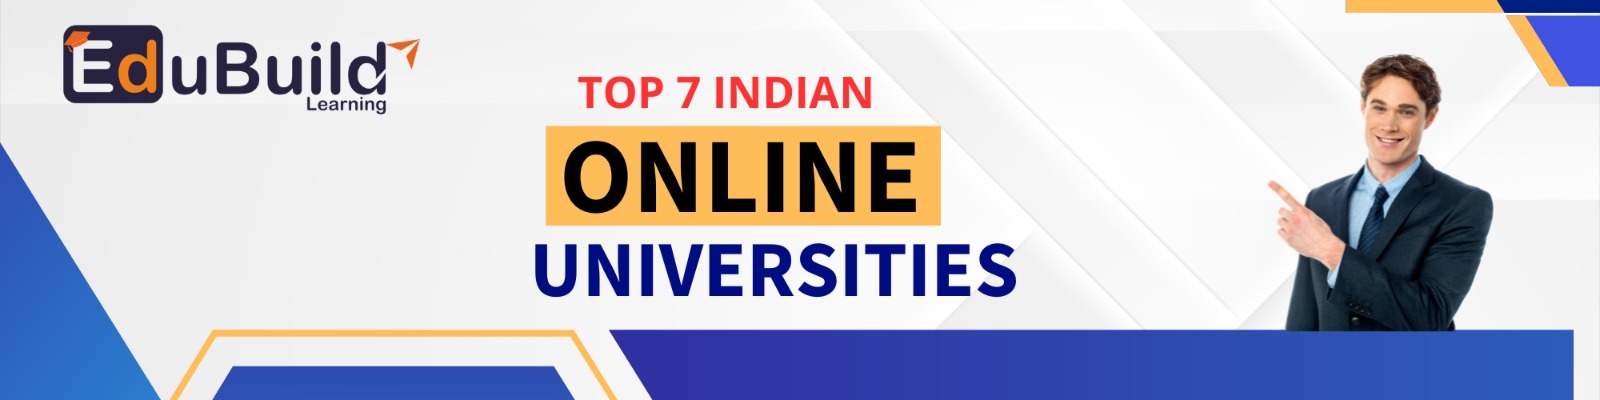 Top 7 Online Universities in India Offering Accredited Online Degree Courses